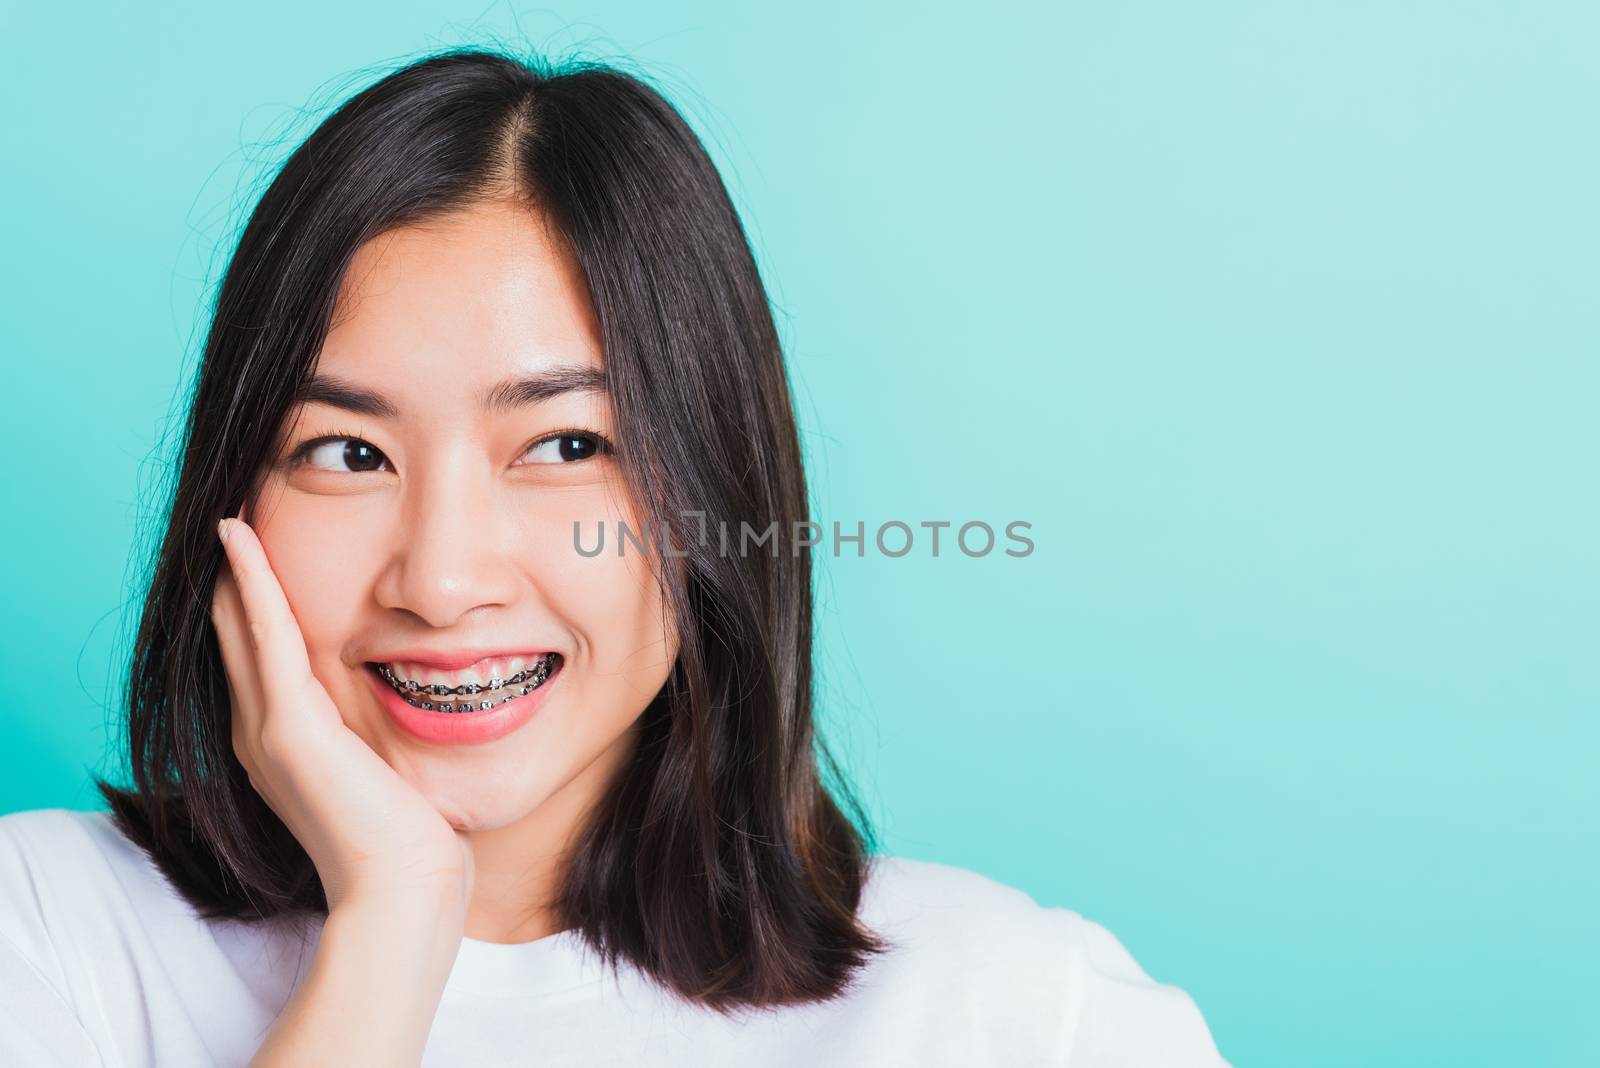 Portrait of Asian teen beautiful young woman smile have dental braces on teeth laughing she touching her face by hand, studio shot isolated on a blue background, Medicine and dentistry concept